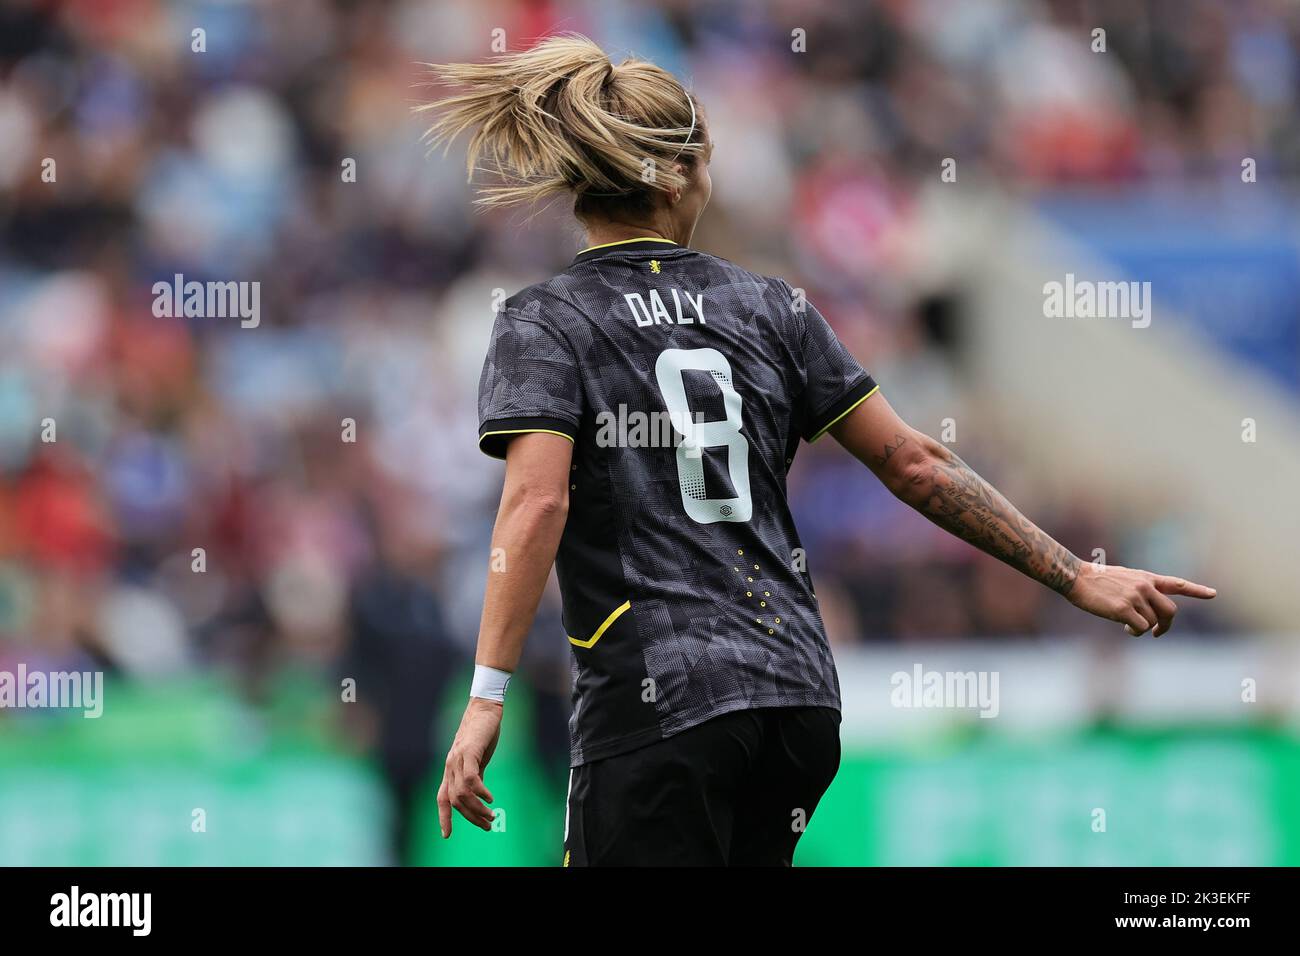 Leicester, UK. 25th Sep, 2022. Leicester, England, September 25th 2022: Rachel Daly (8 Aston Villa) gestures during the Barclays FA Womens Super League game between Leicester City and Aston Villa at the King Power Stadium in Leicester, England. (James Holyoak/SPP) Credit: SPP Sport Press Photo. /Alamy Live News Stock Photo